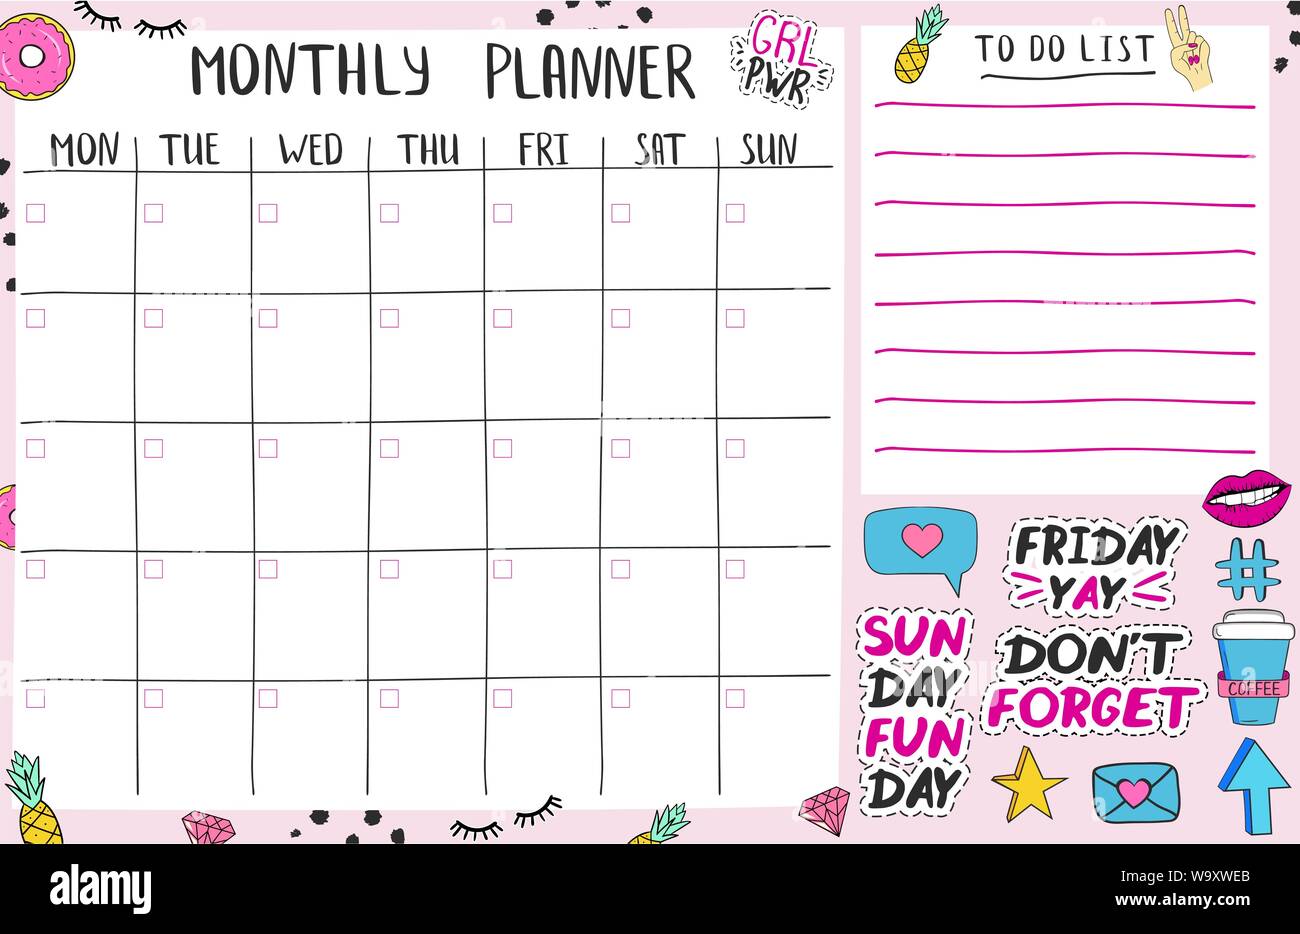 Example of Cute Monthly Planner Template